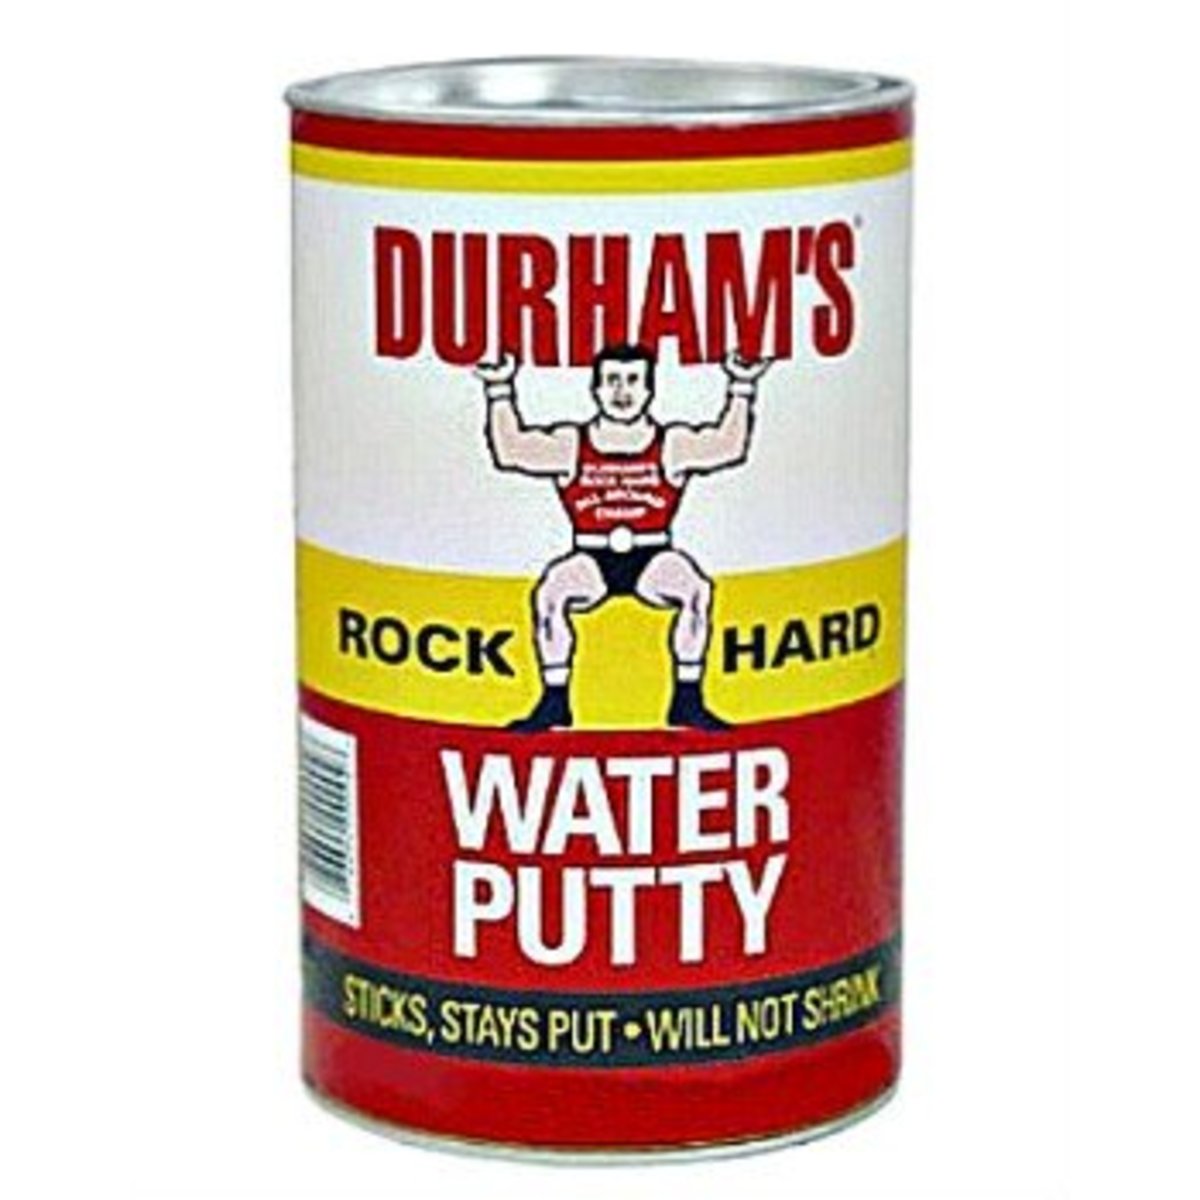 my-review-of-durhams-water-putty-for-cabinet-painting